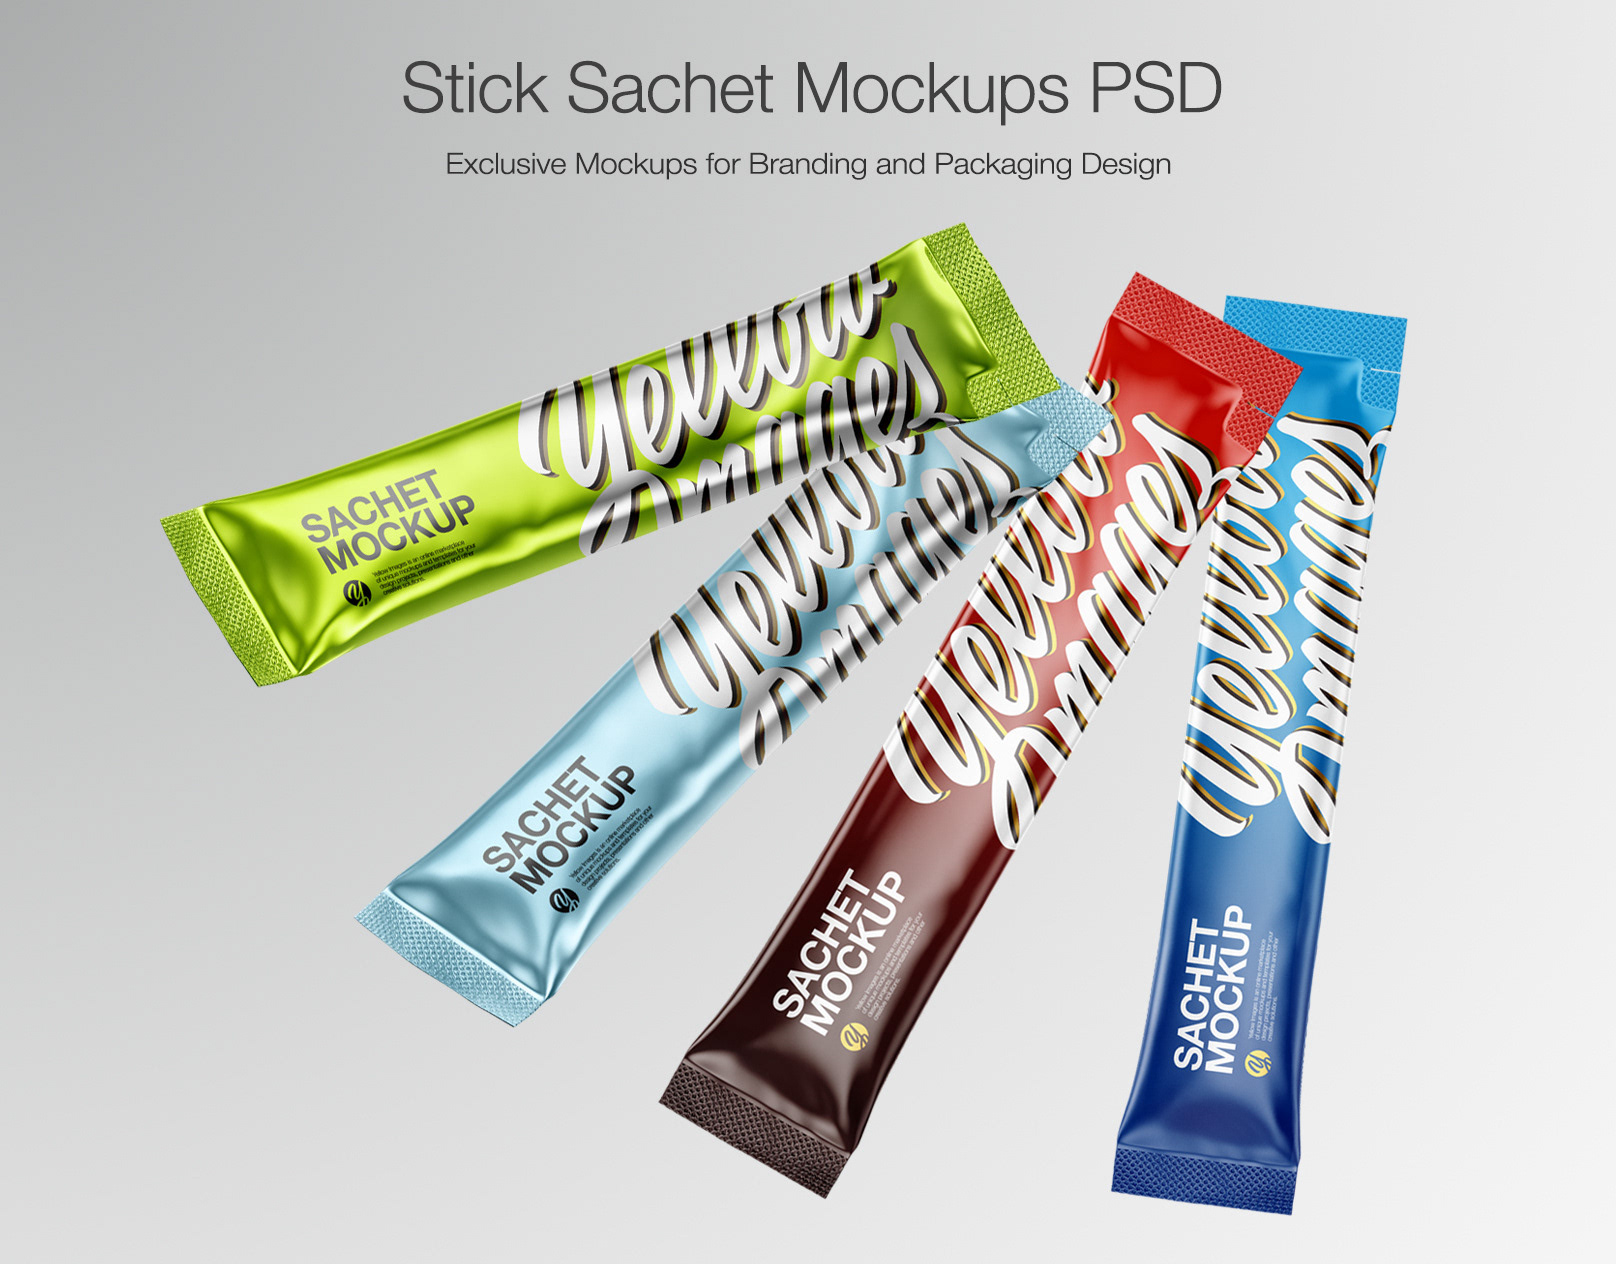 Download Stick Sachet Projects Photos Videos Logos Illustrations And Branding On Behance Yellowimages Mockups